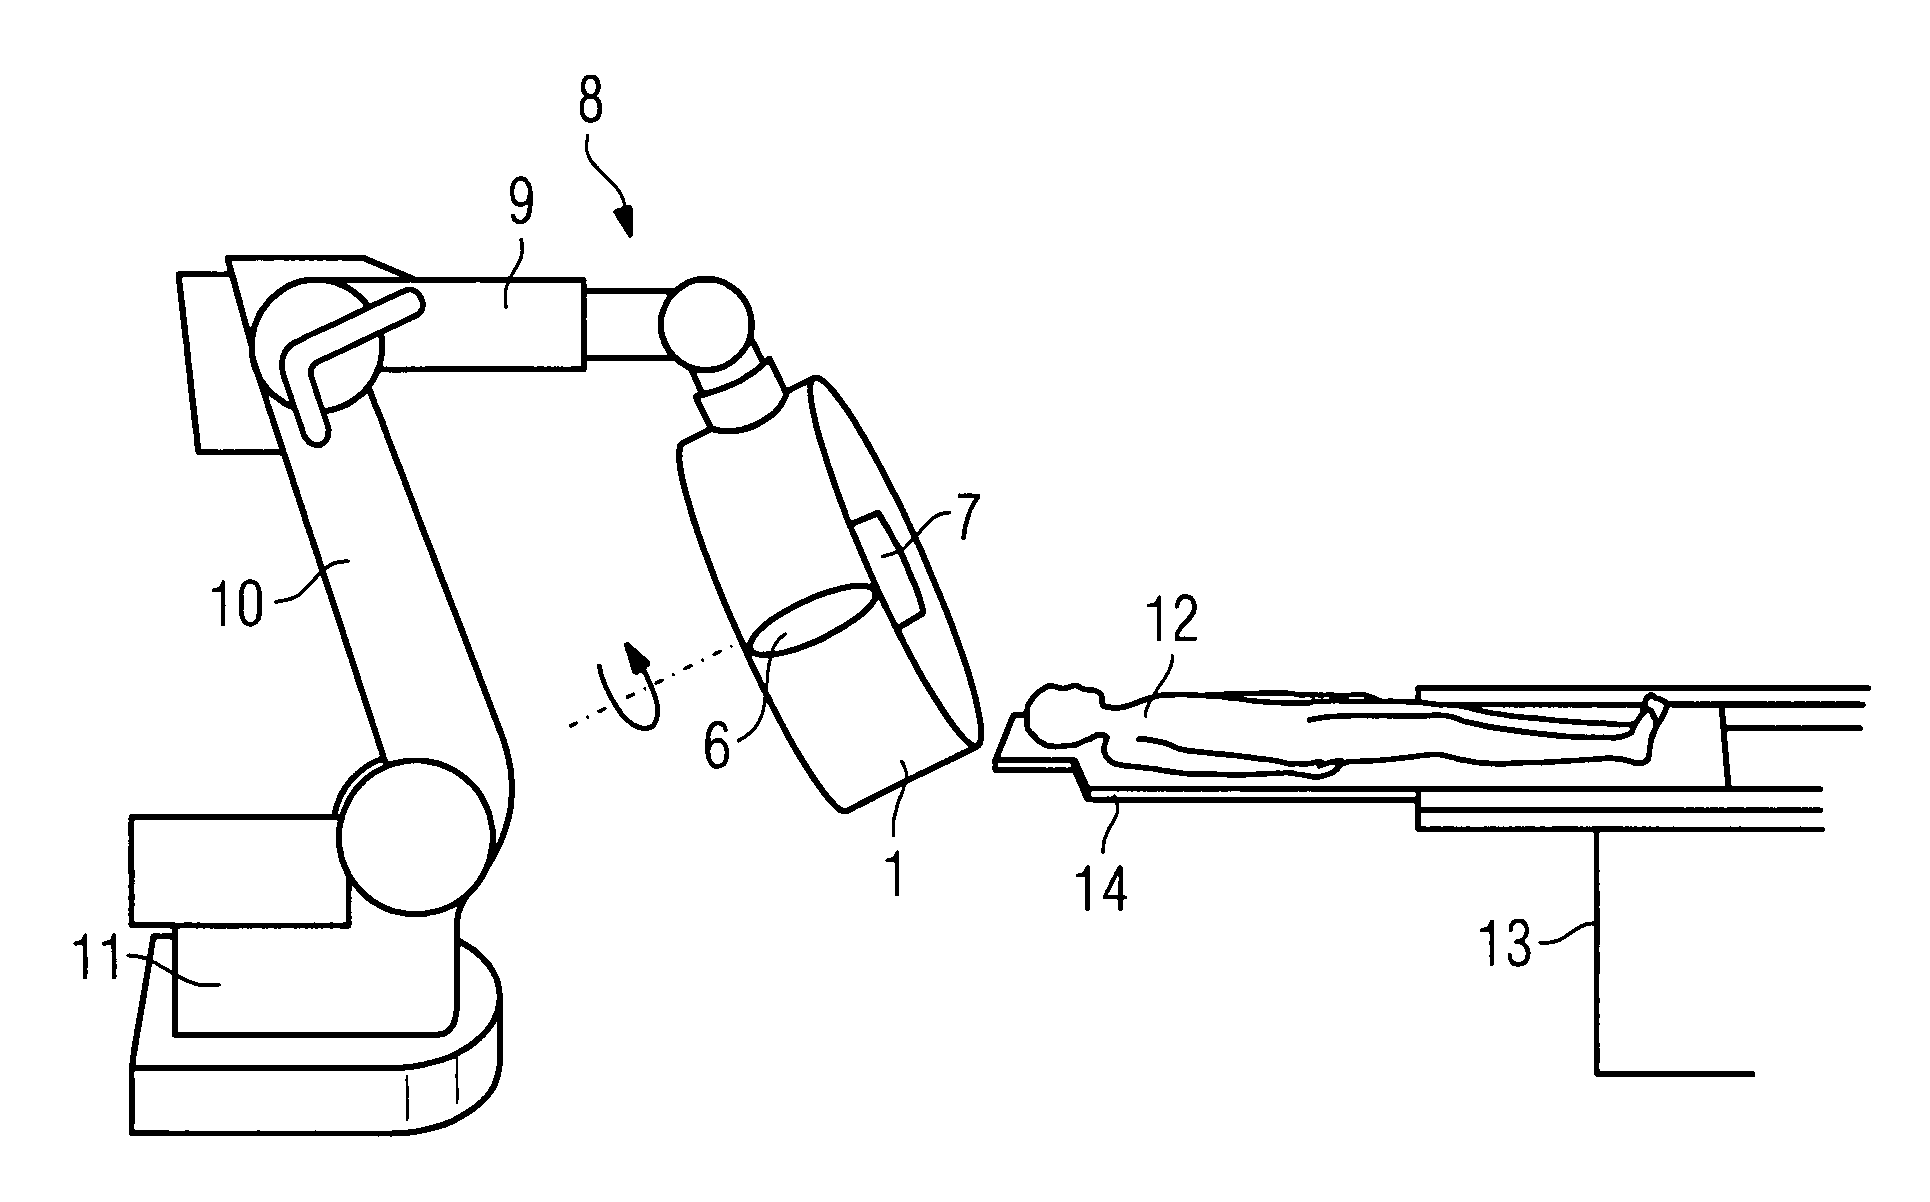 Medical examination and/or treatment apparatus with an electromagnet for navigating a medical instrument and an x-ray device for visual inspection during the navigation